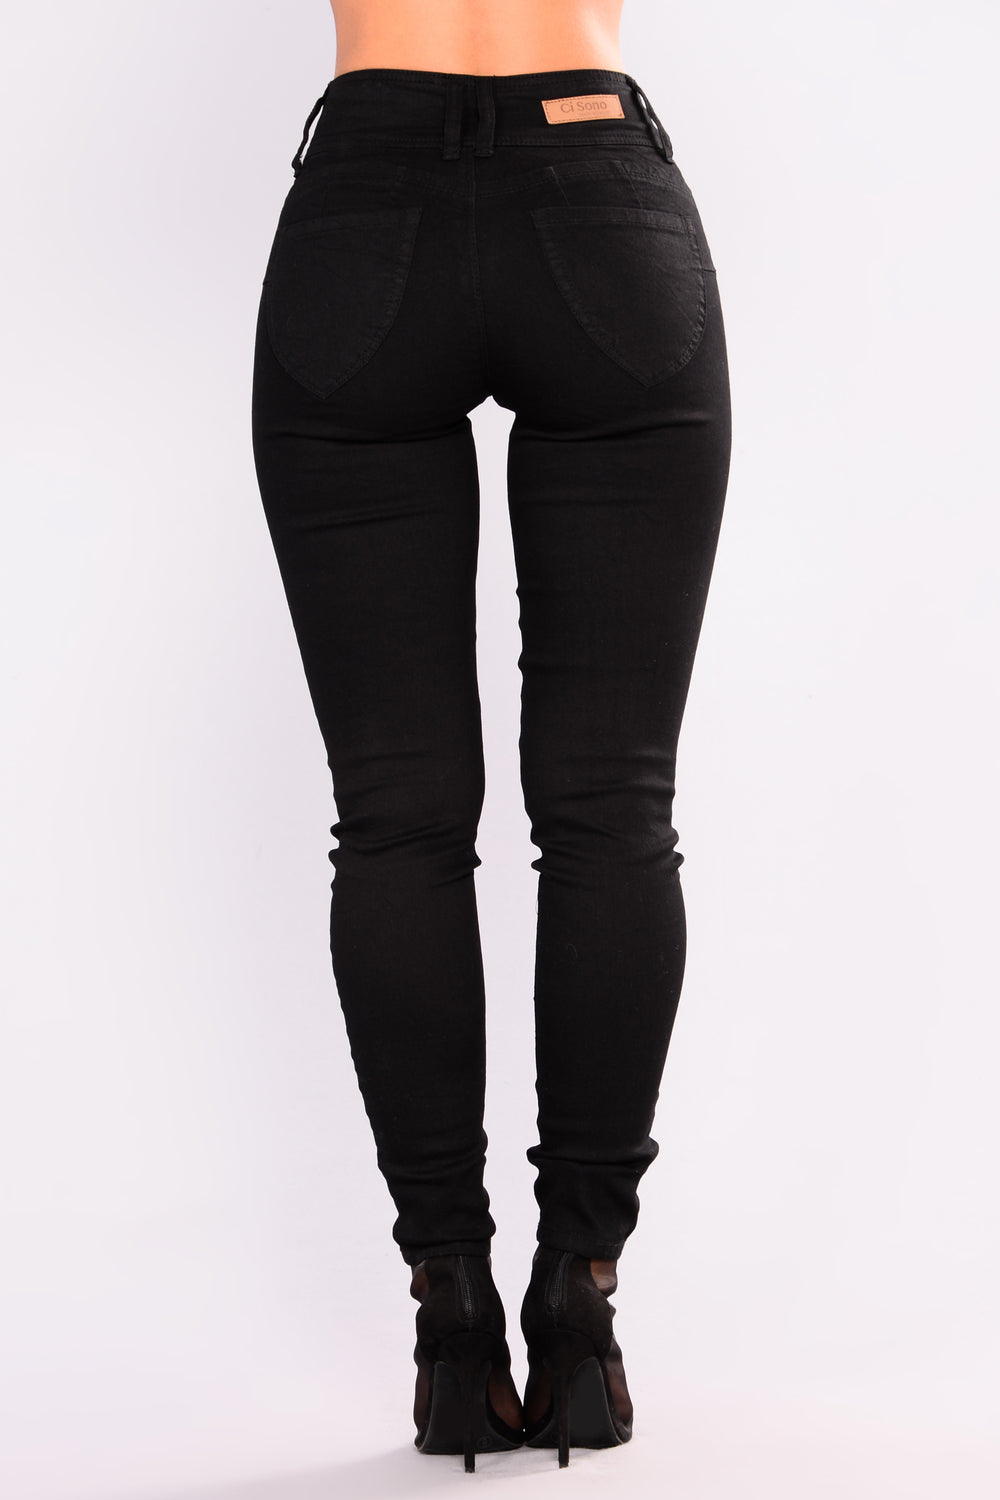 Back It Up Booty Lifting Jeans - Black